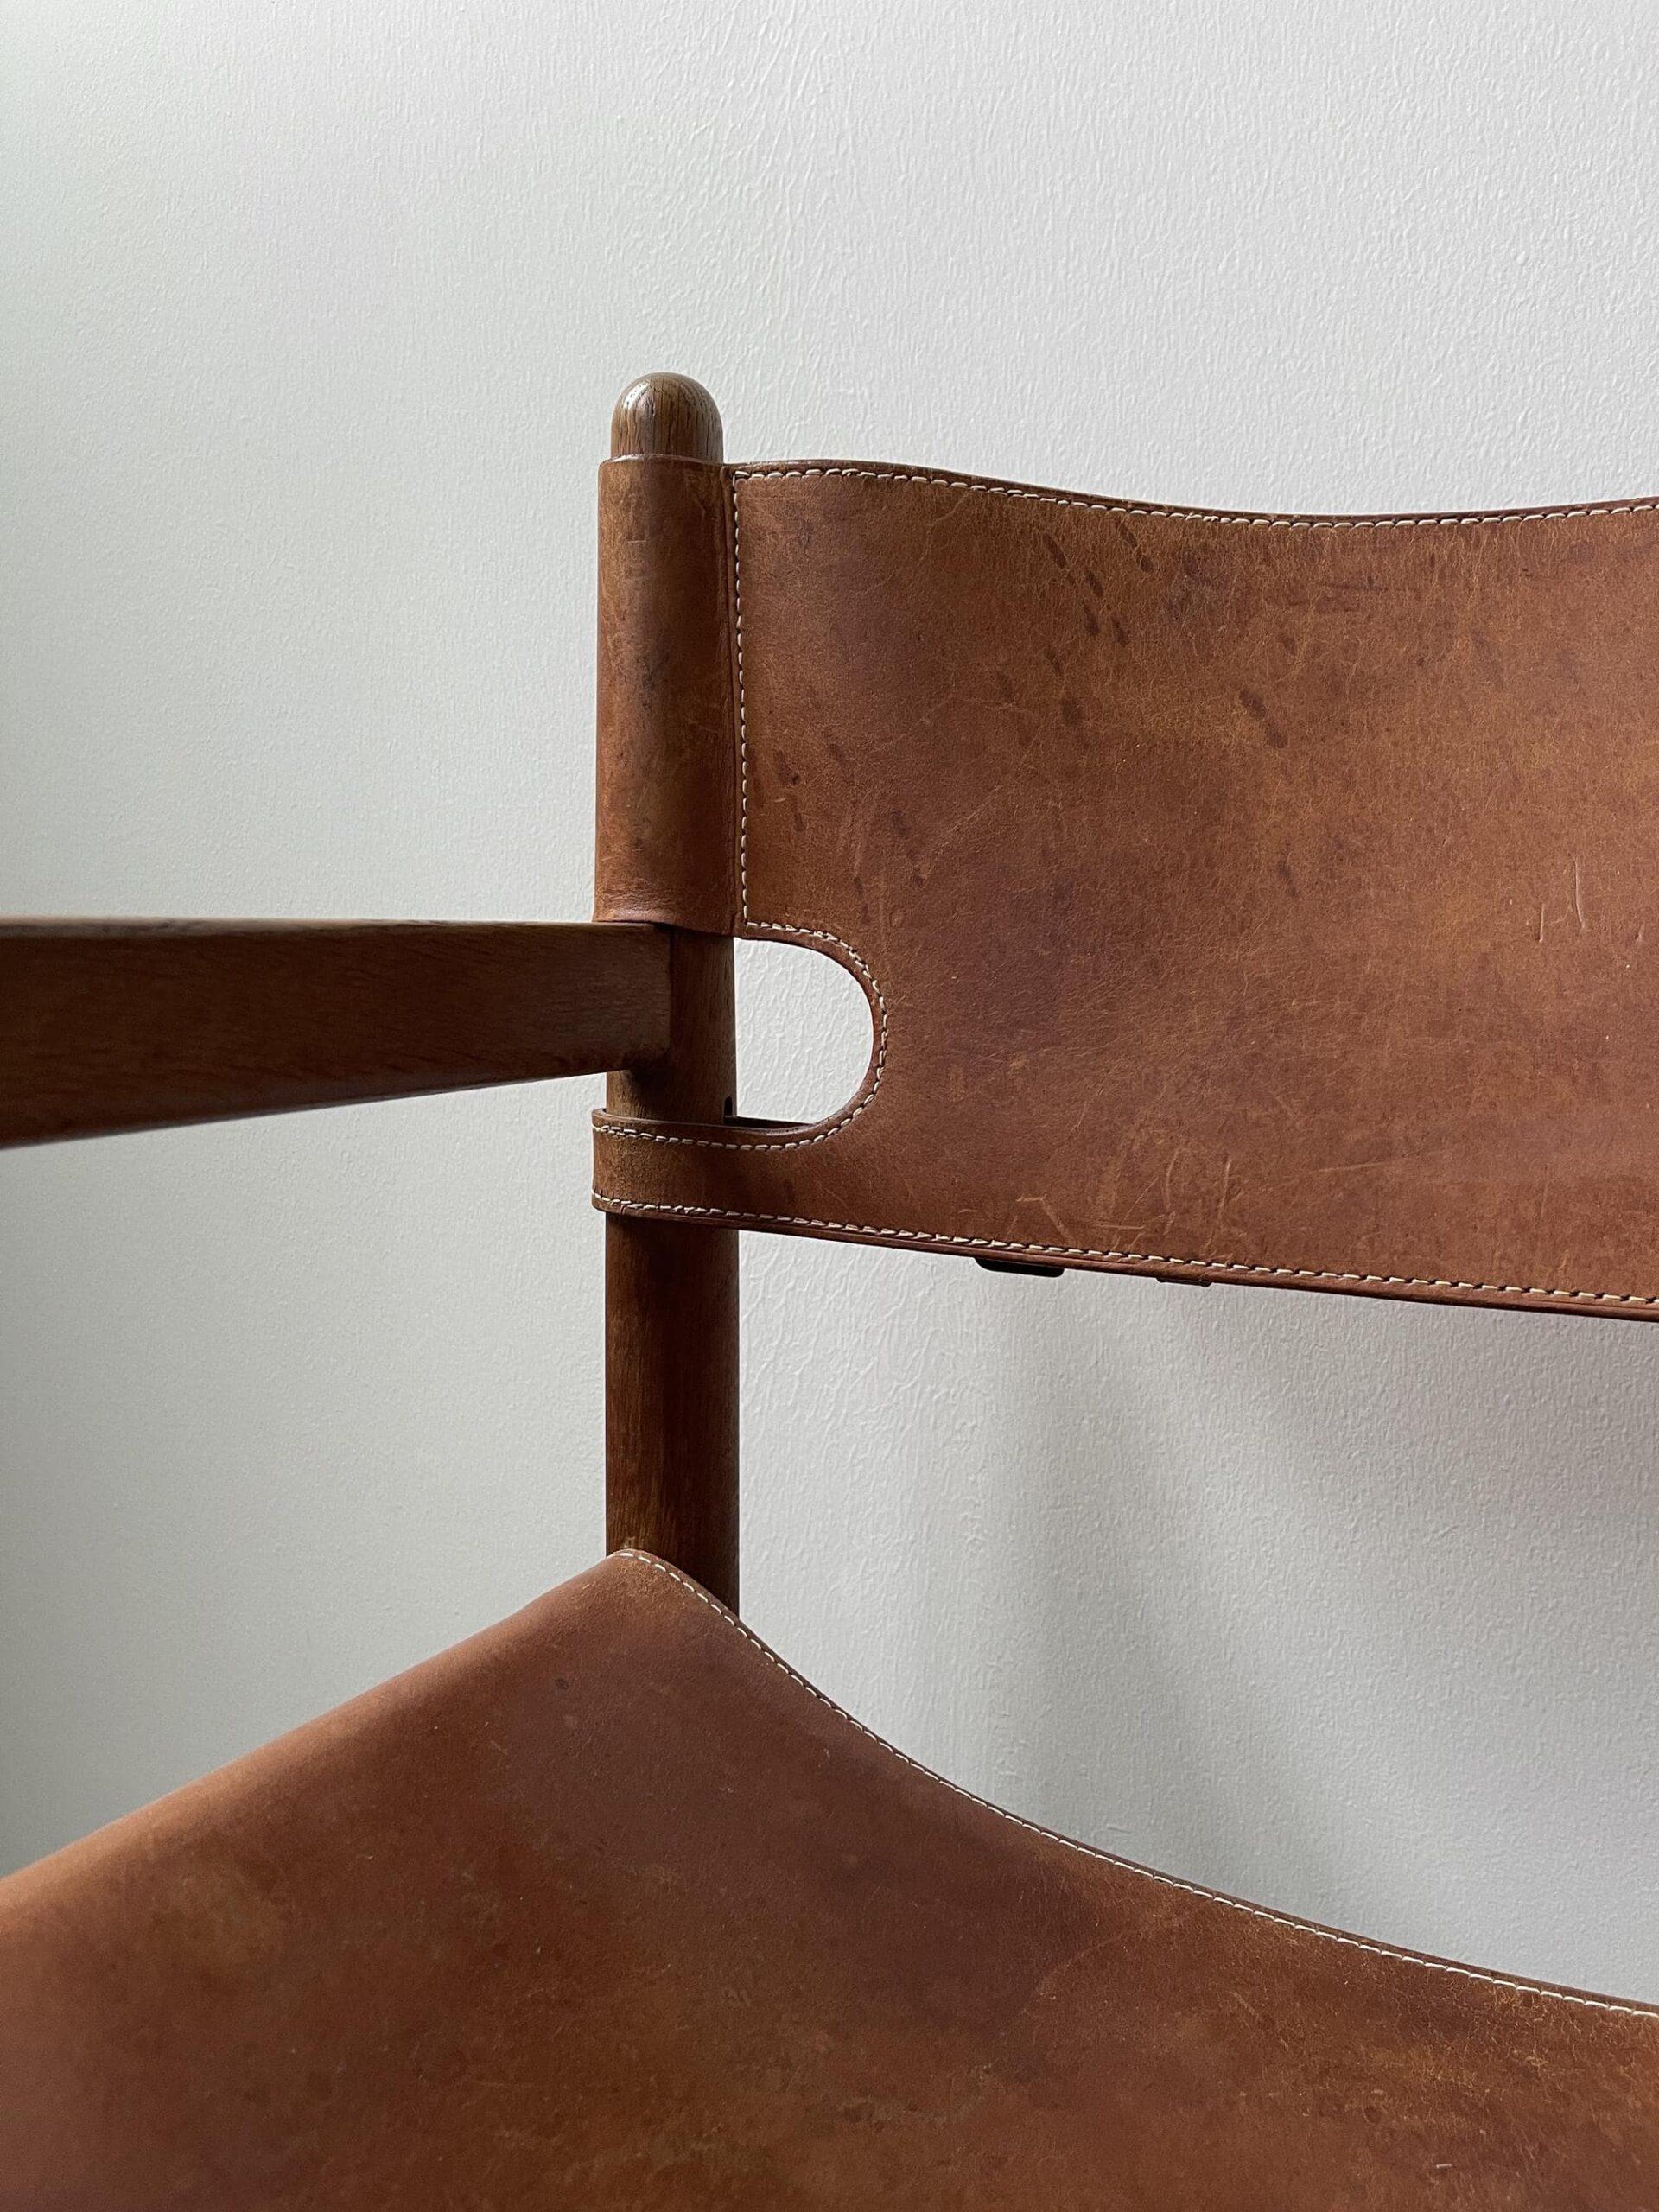 This model 3238 was designed in 1958, and is a variation of Mogensen’s famous Spanish Chair. The seat and back of these chairs can be tightened as required. The oak frames have original saddle leather backs and seats with contrast stitching. 

This